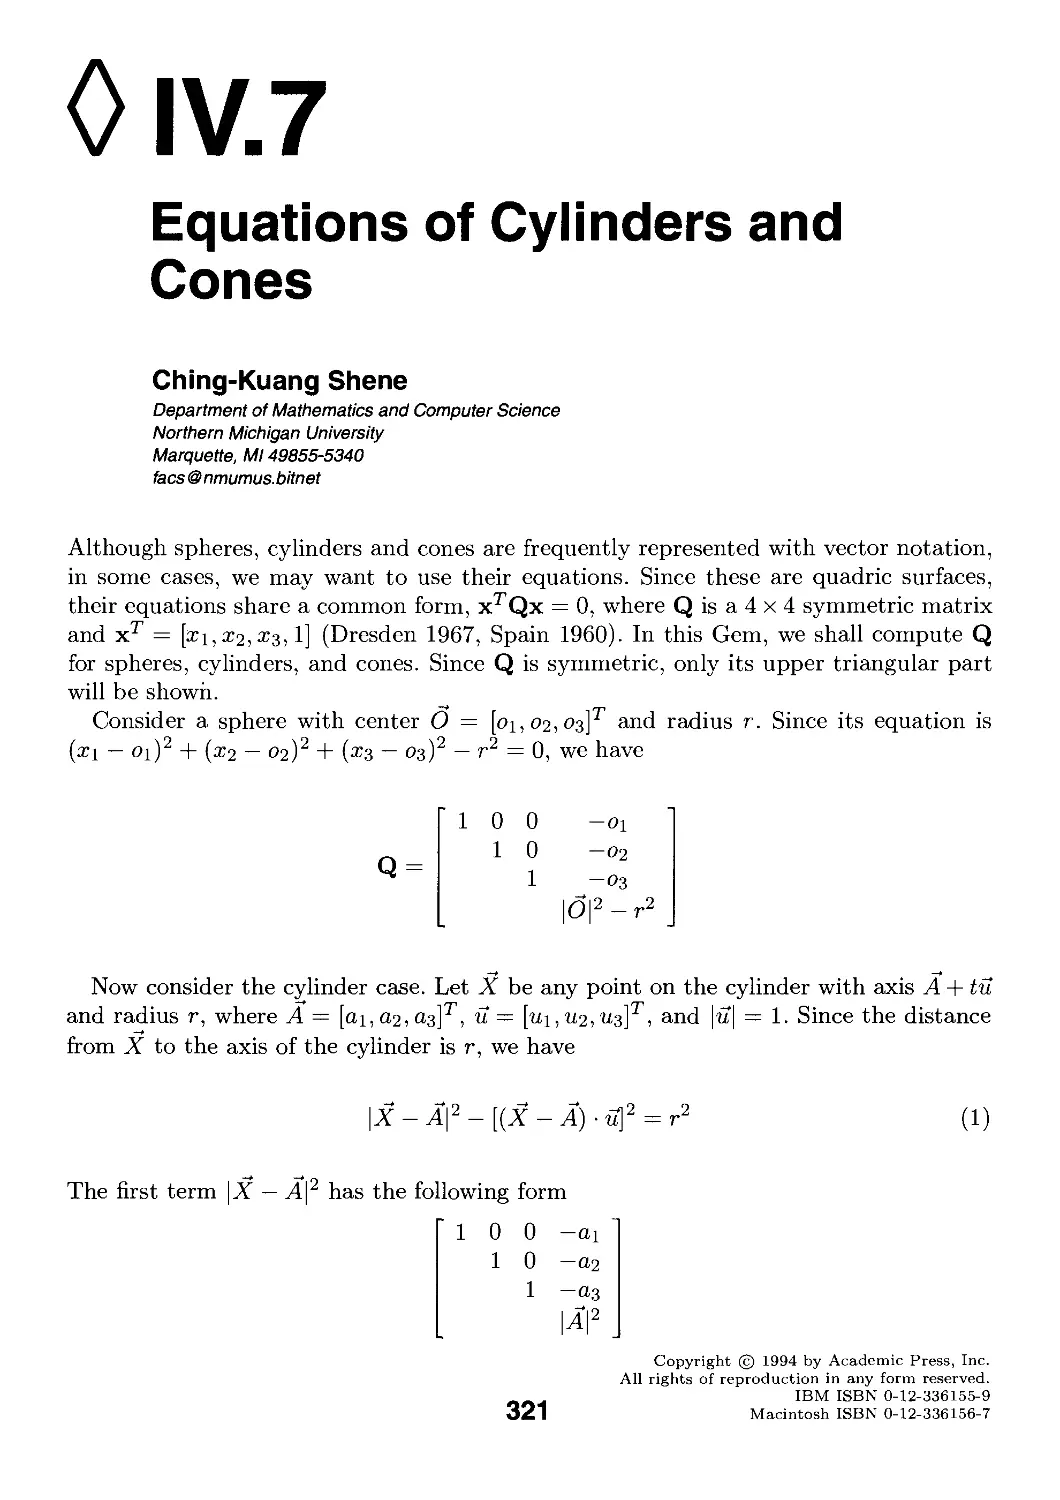 IV.7. Equations of Cylinders and Cones by Ching-Kuang Shene